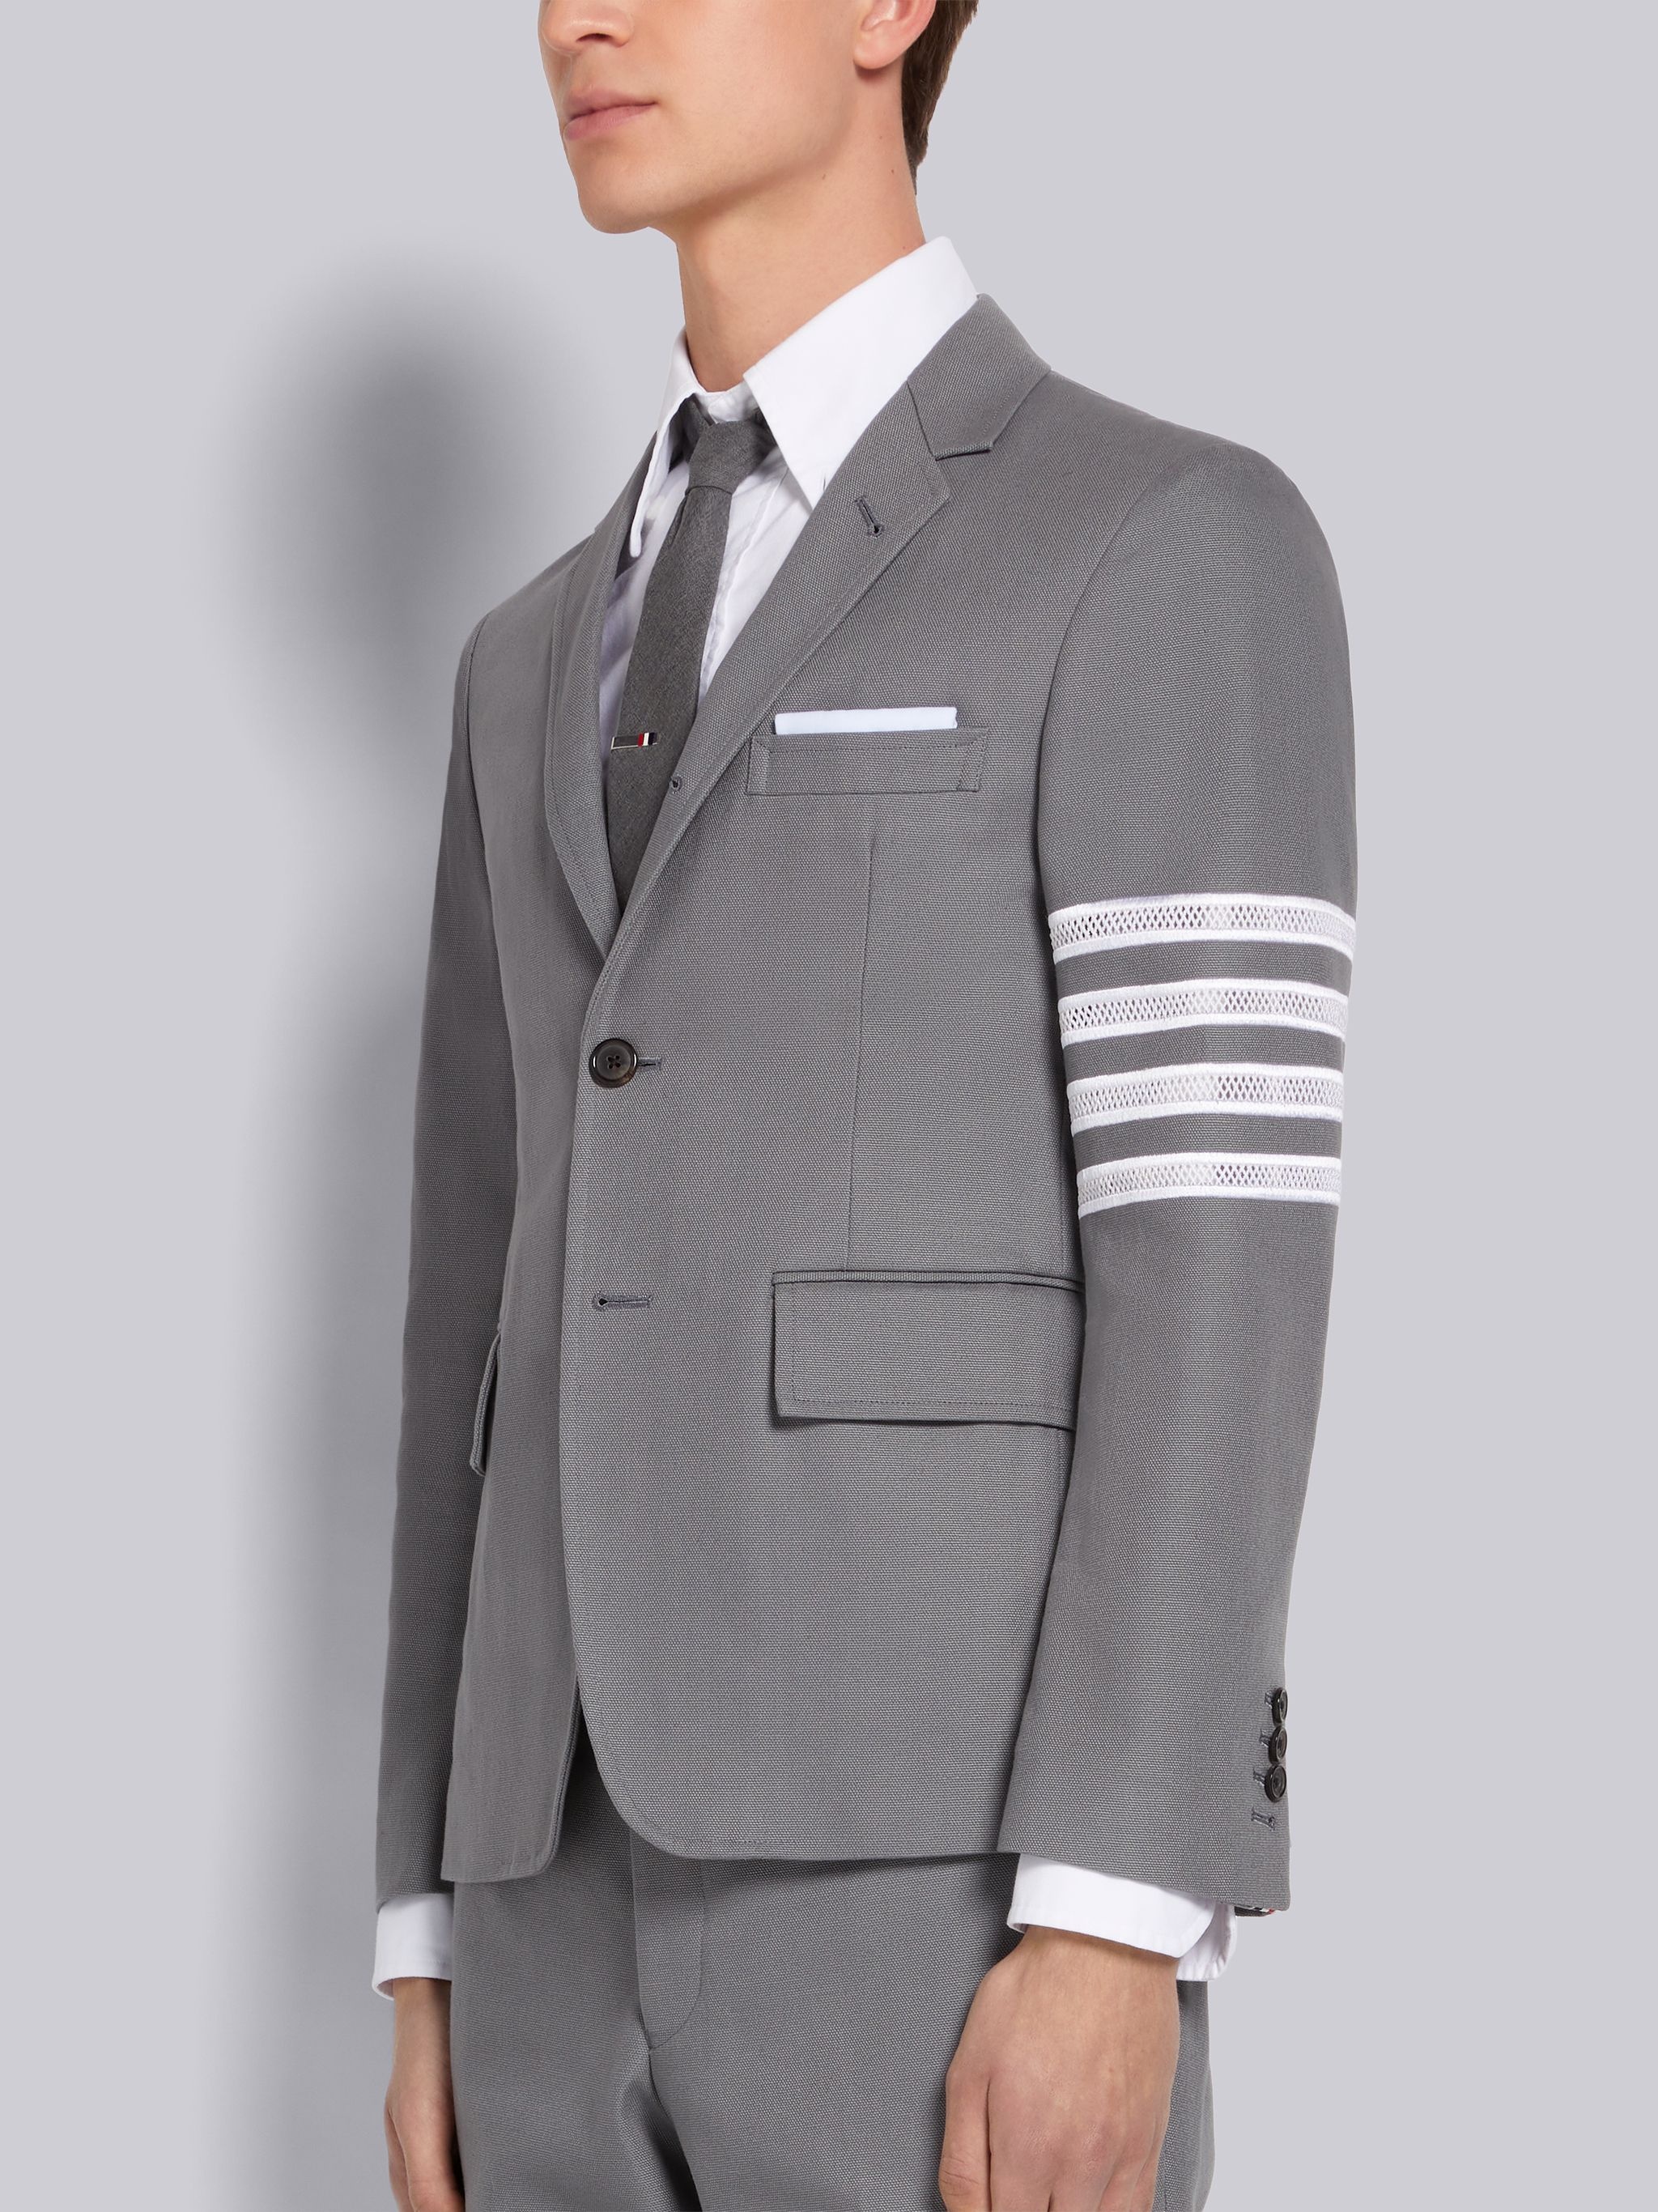 Medium Grey Cotton 4-Bar Broderie Anglaise Unconstructed Classic Sport Coat - 2